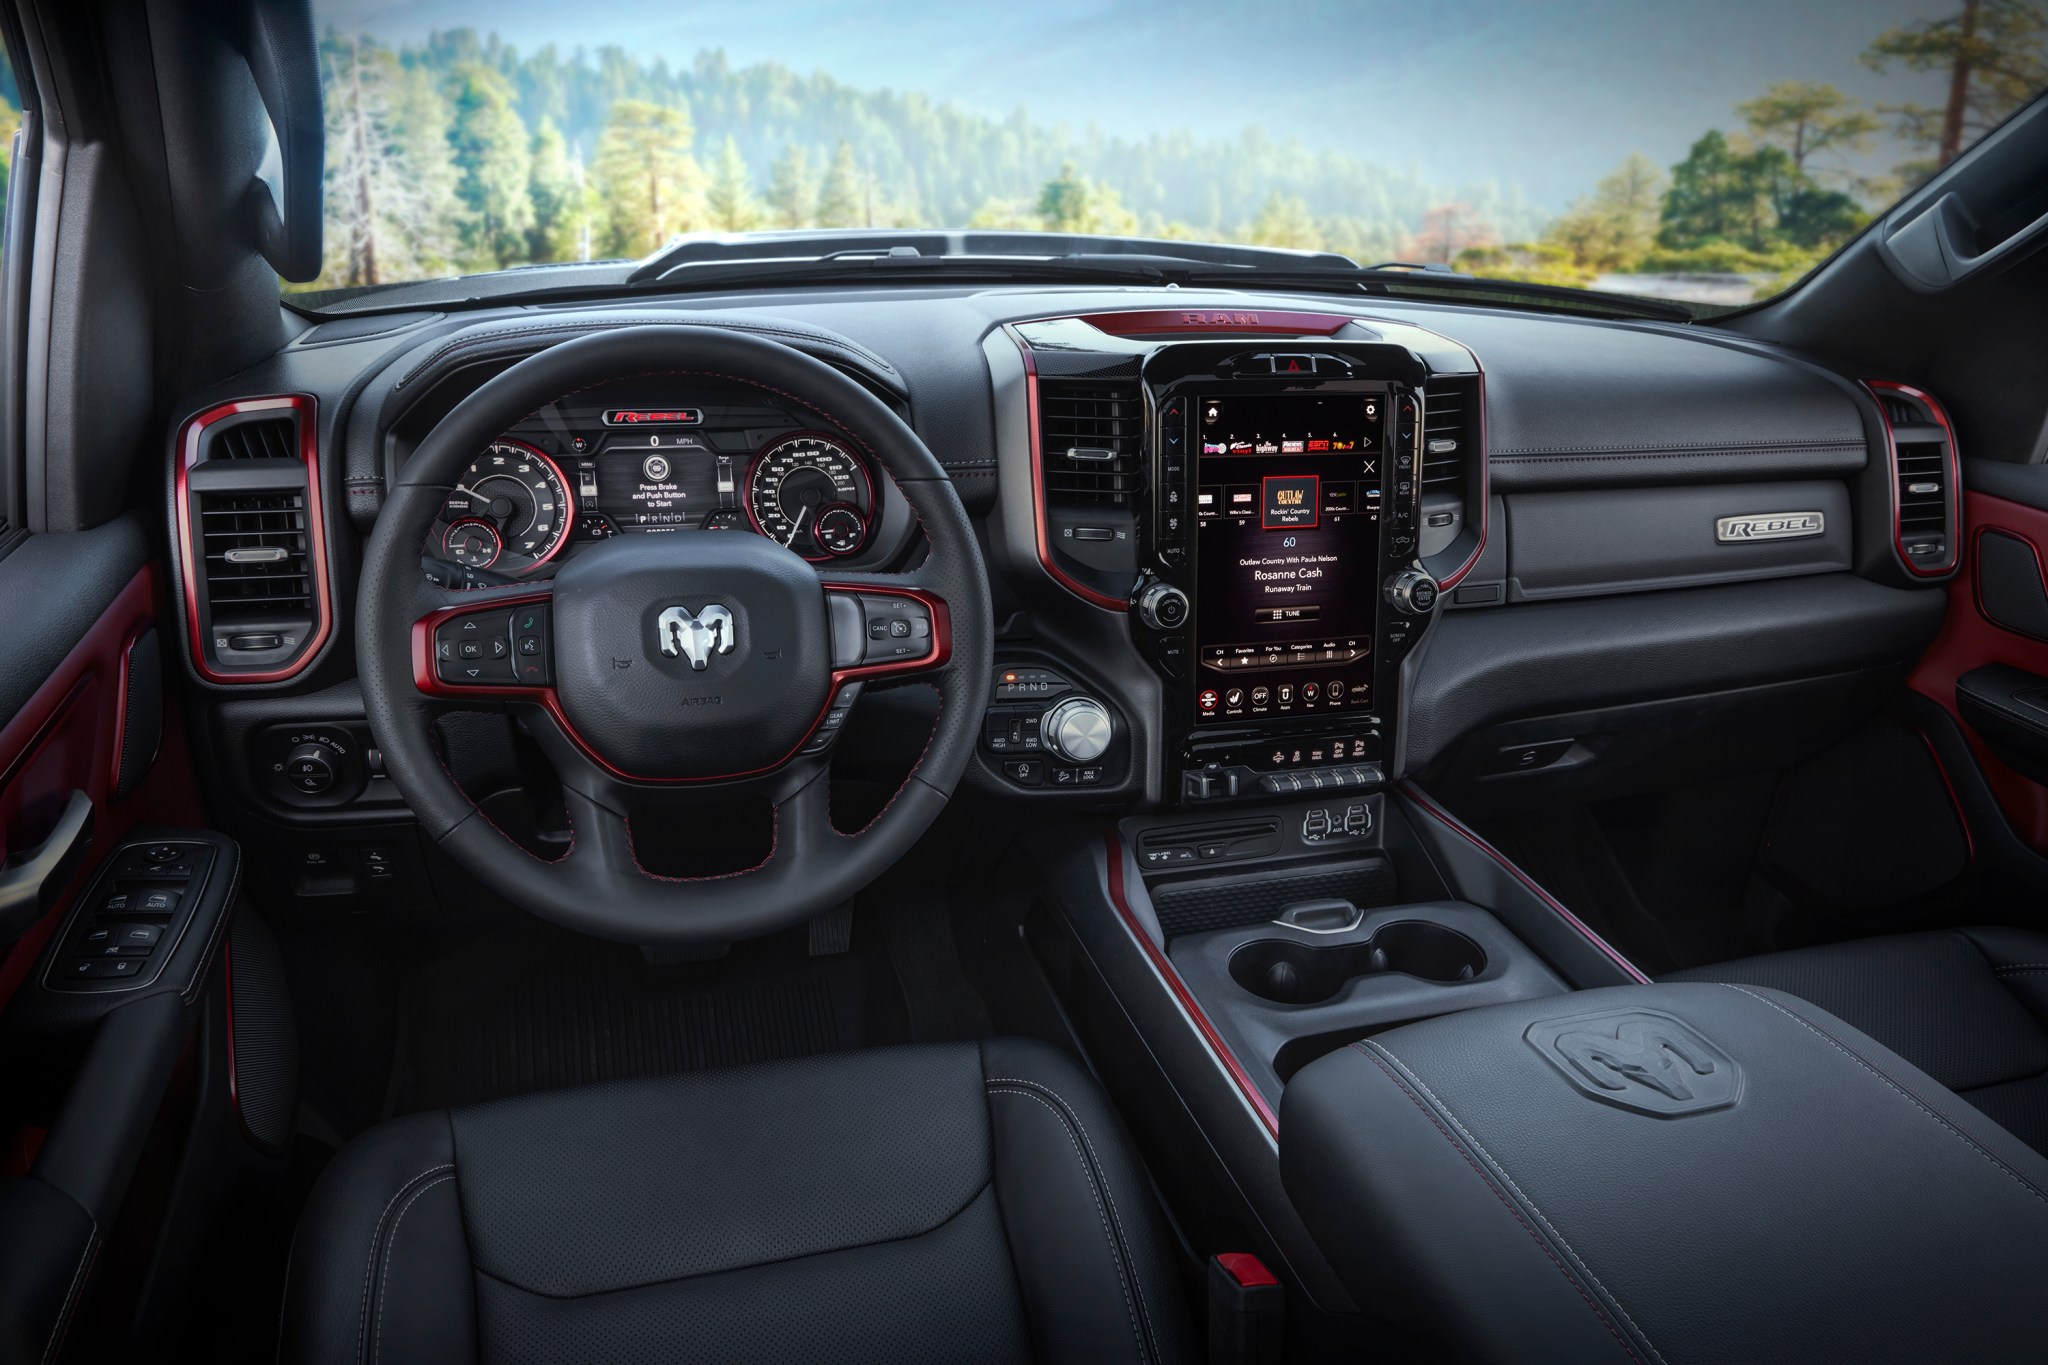 You’ll want to see the interior of the new 2019 Ram 1500 Rebel 12